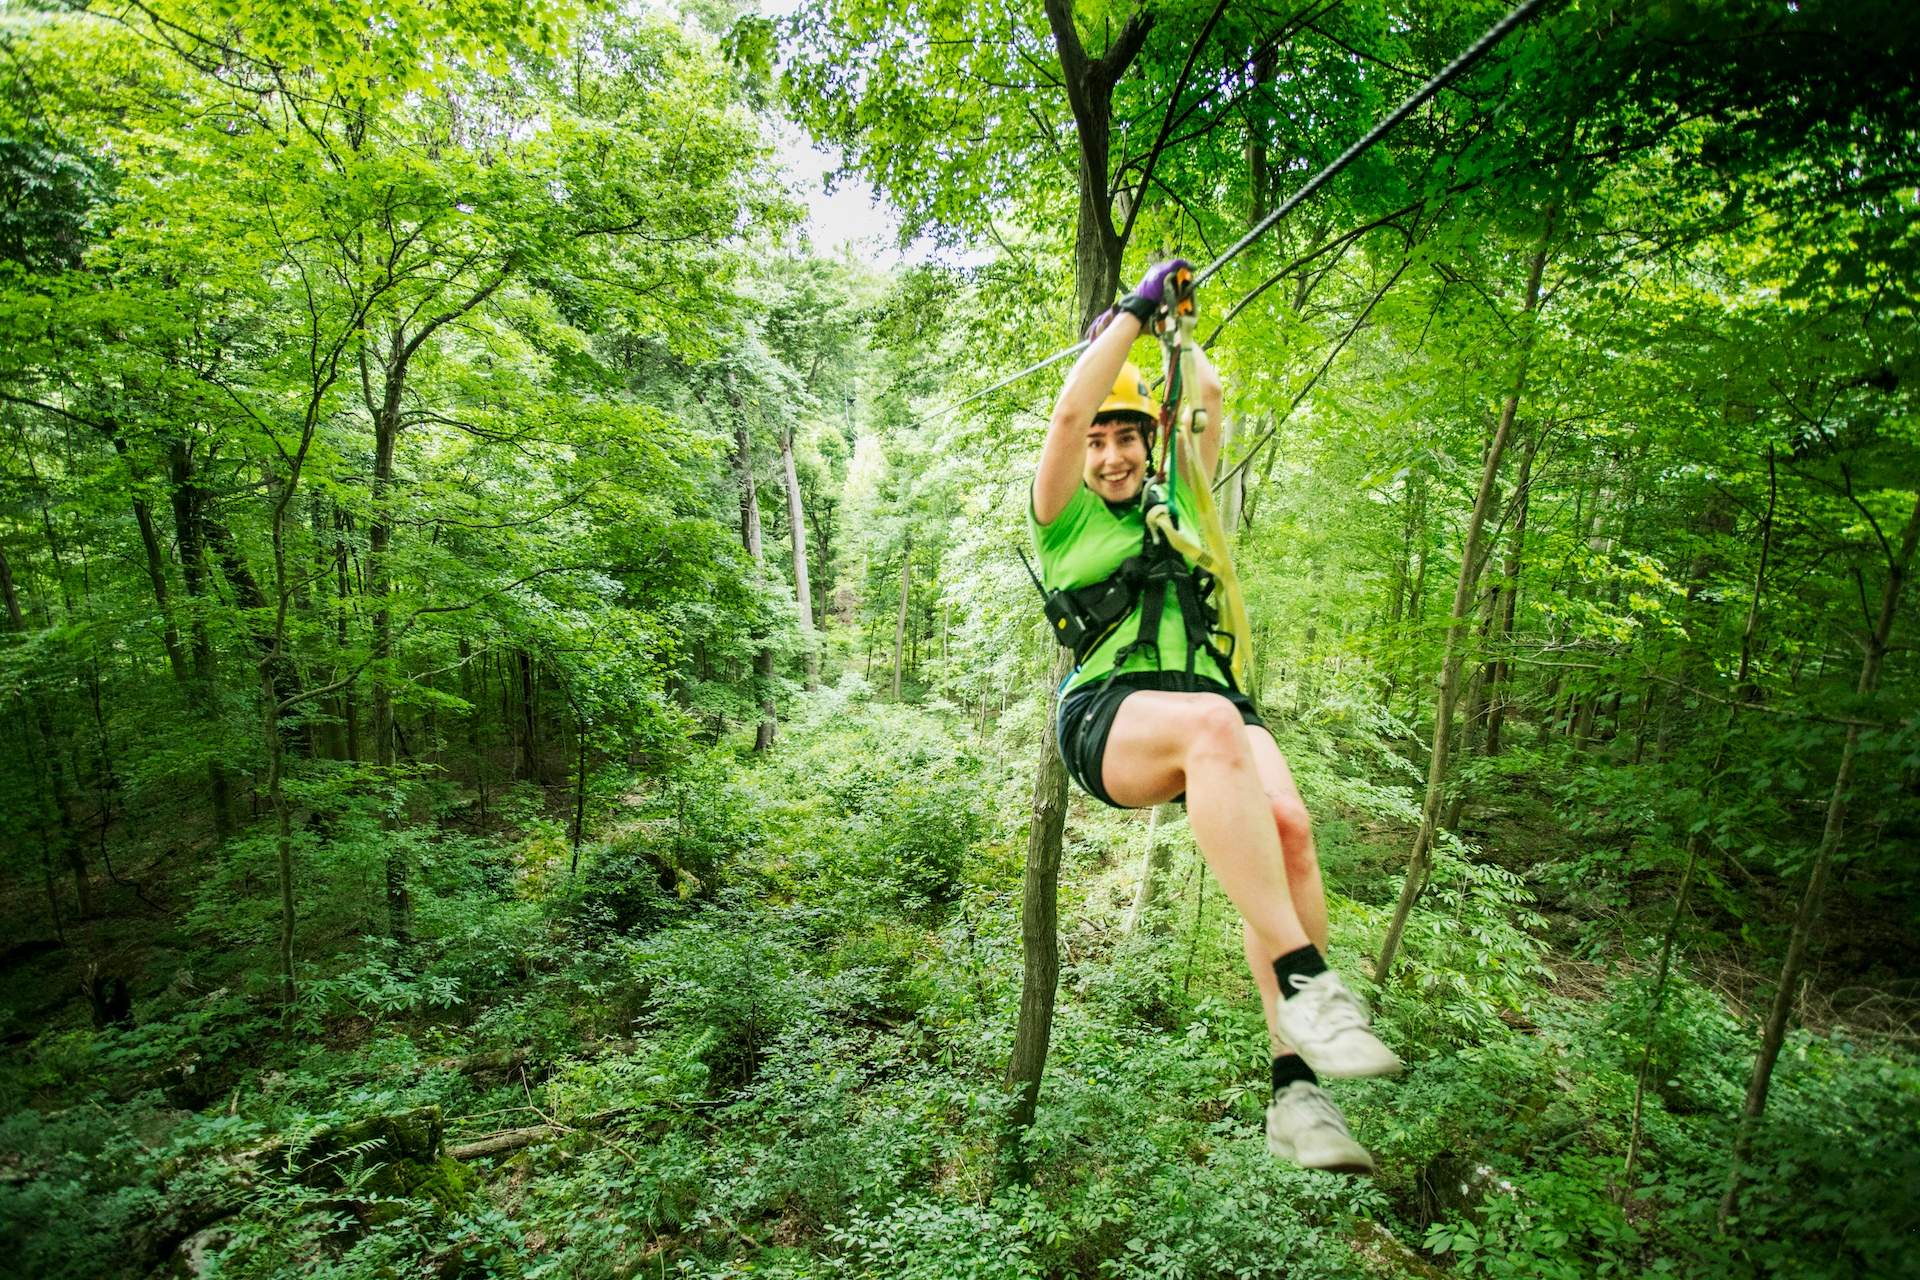 A woman sliding down a line from a flying fox amongst the trees